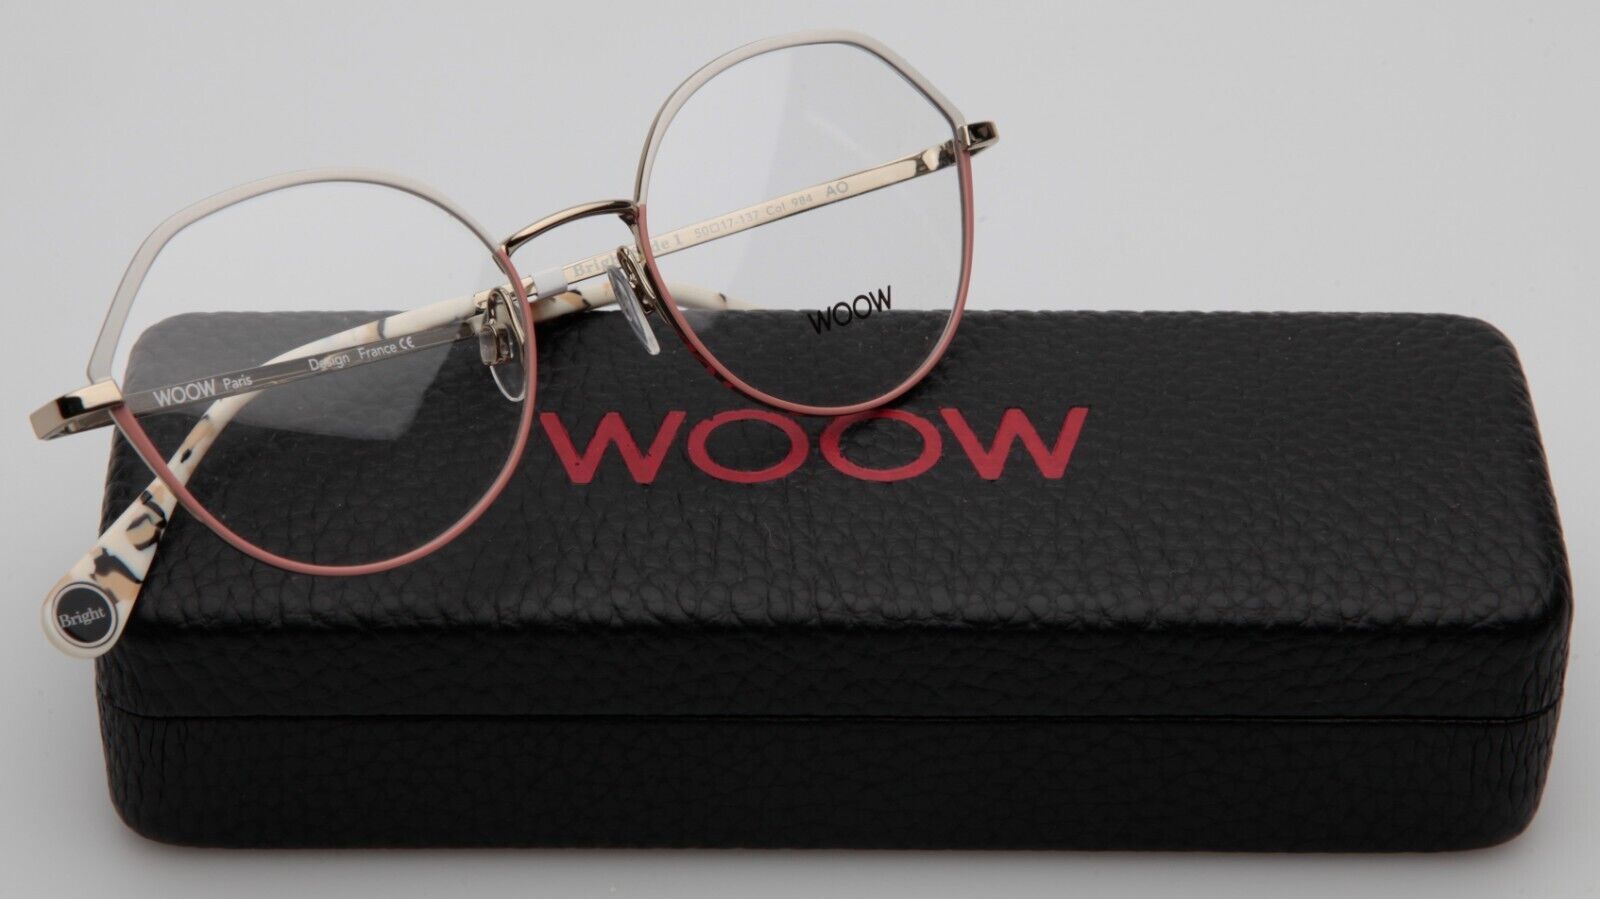 Primary image for NEW WOOW Bright Side 1 Col 984 White  EYEGLASSES FRAME 50-17-137mm B44mm